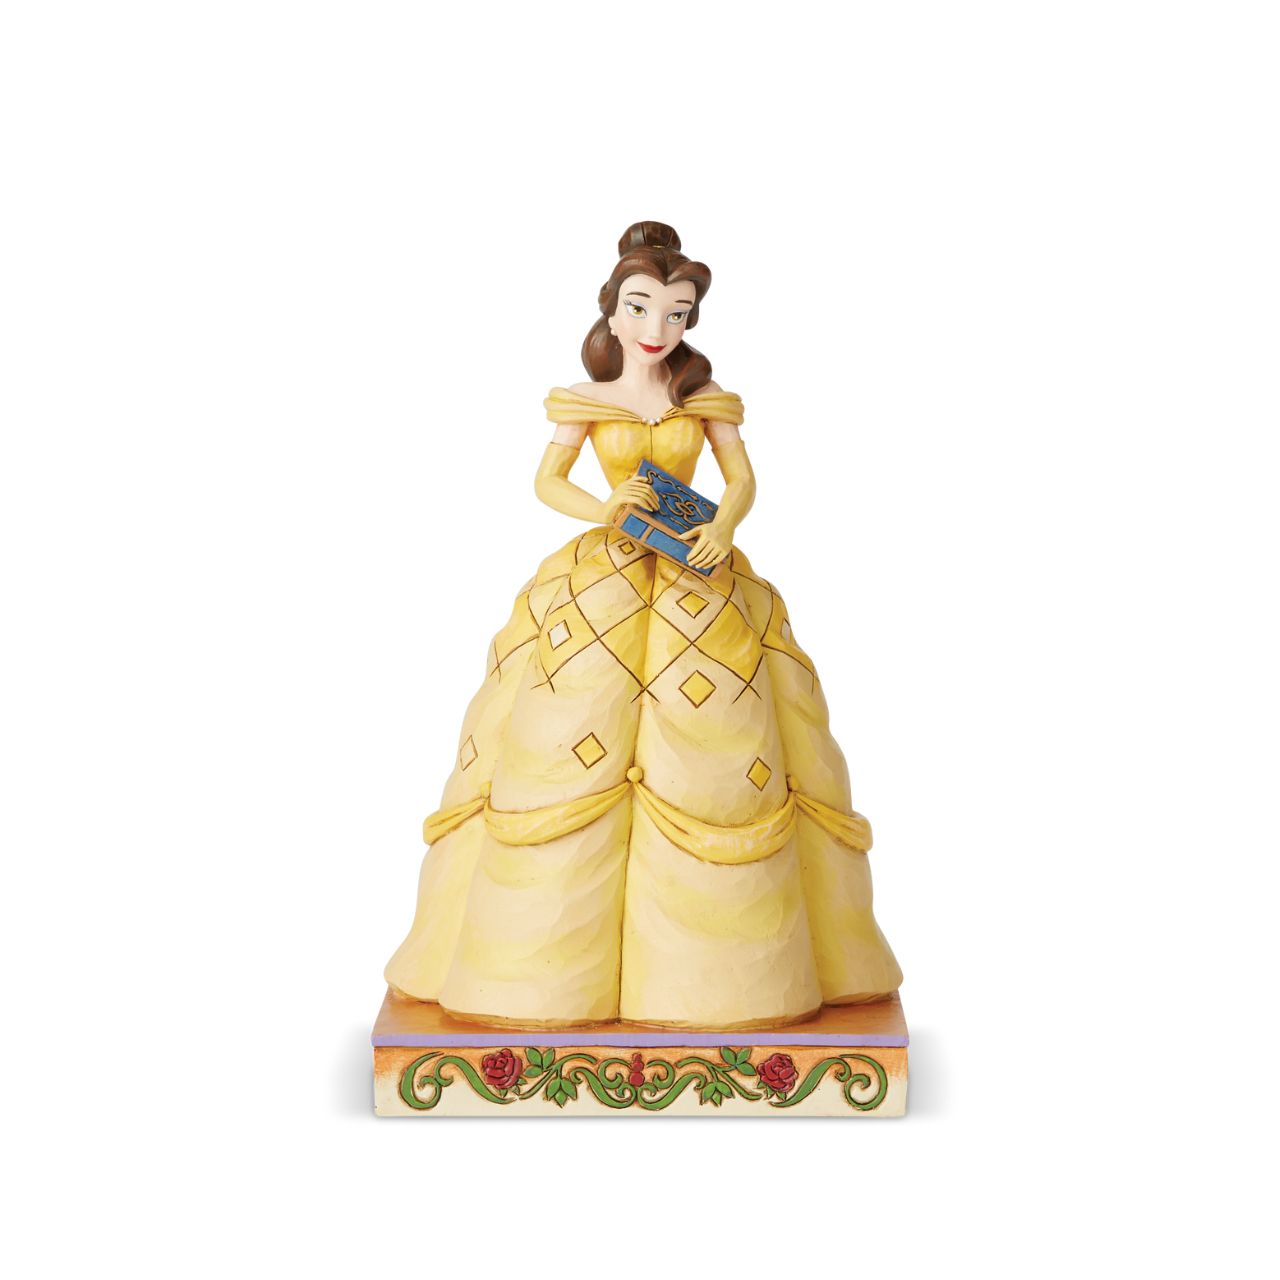 Disney Traditions Book-Smart Beauty Belle Princess Passion  Belle always has her nose in a book, filling her imagination with adventure. The book-smart beauty begins her own timeless tale when she meets the Beast. In this lovely Jim Shore design, Belle wears her classic yellow gown and holds a book in her hands.